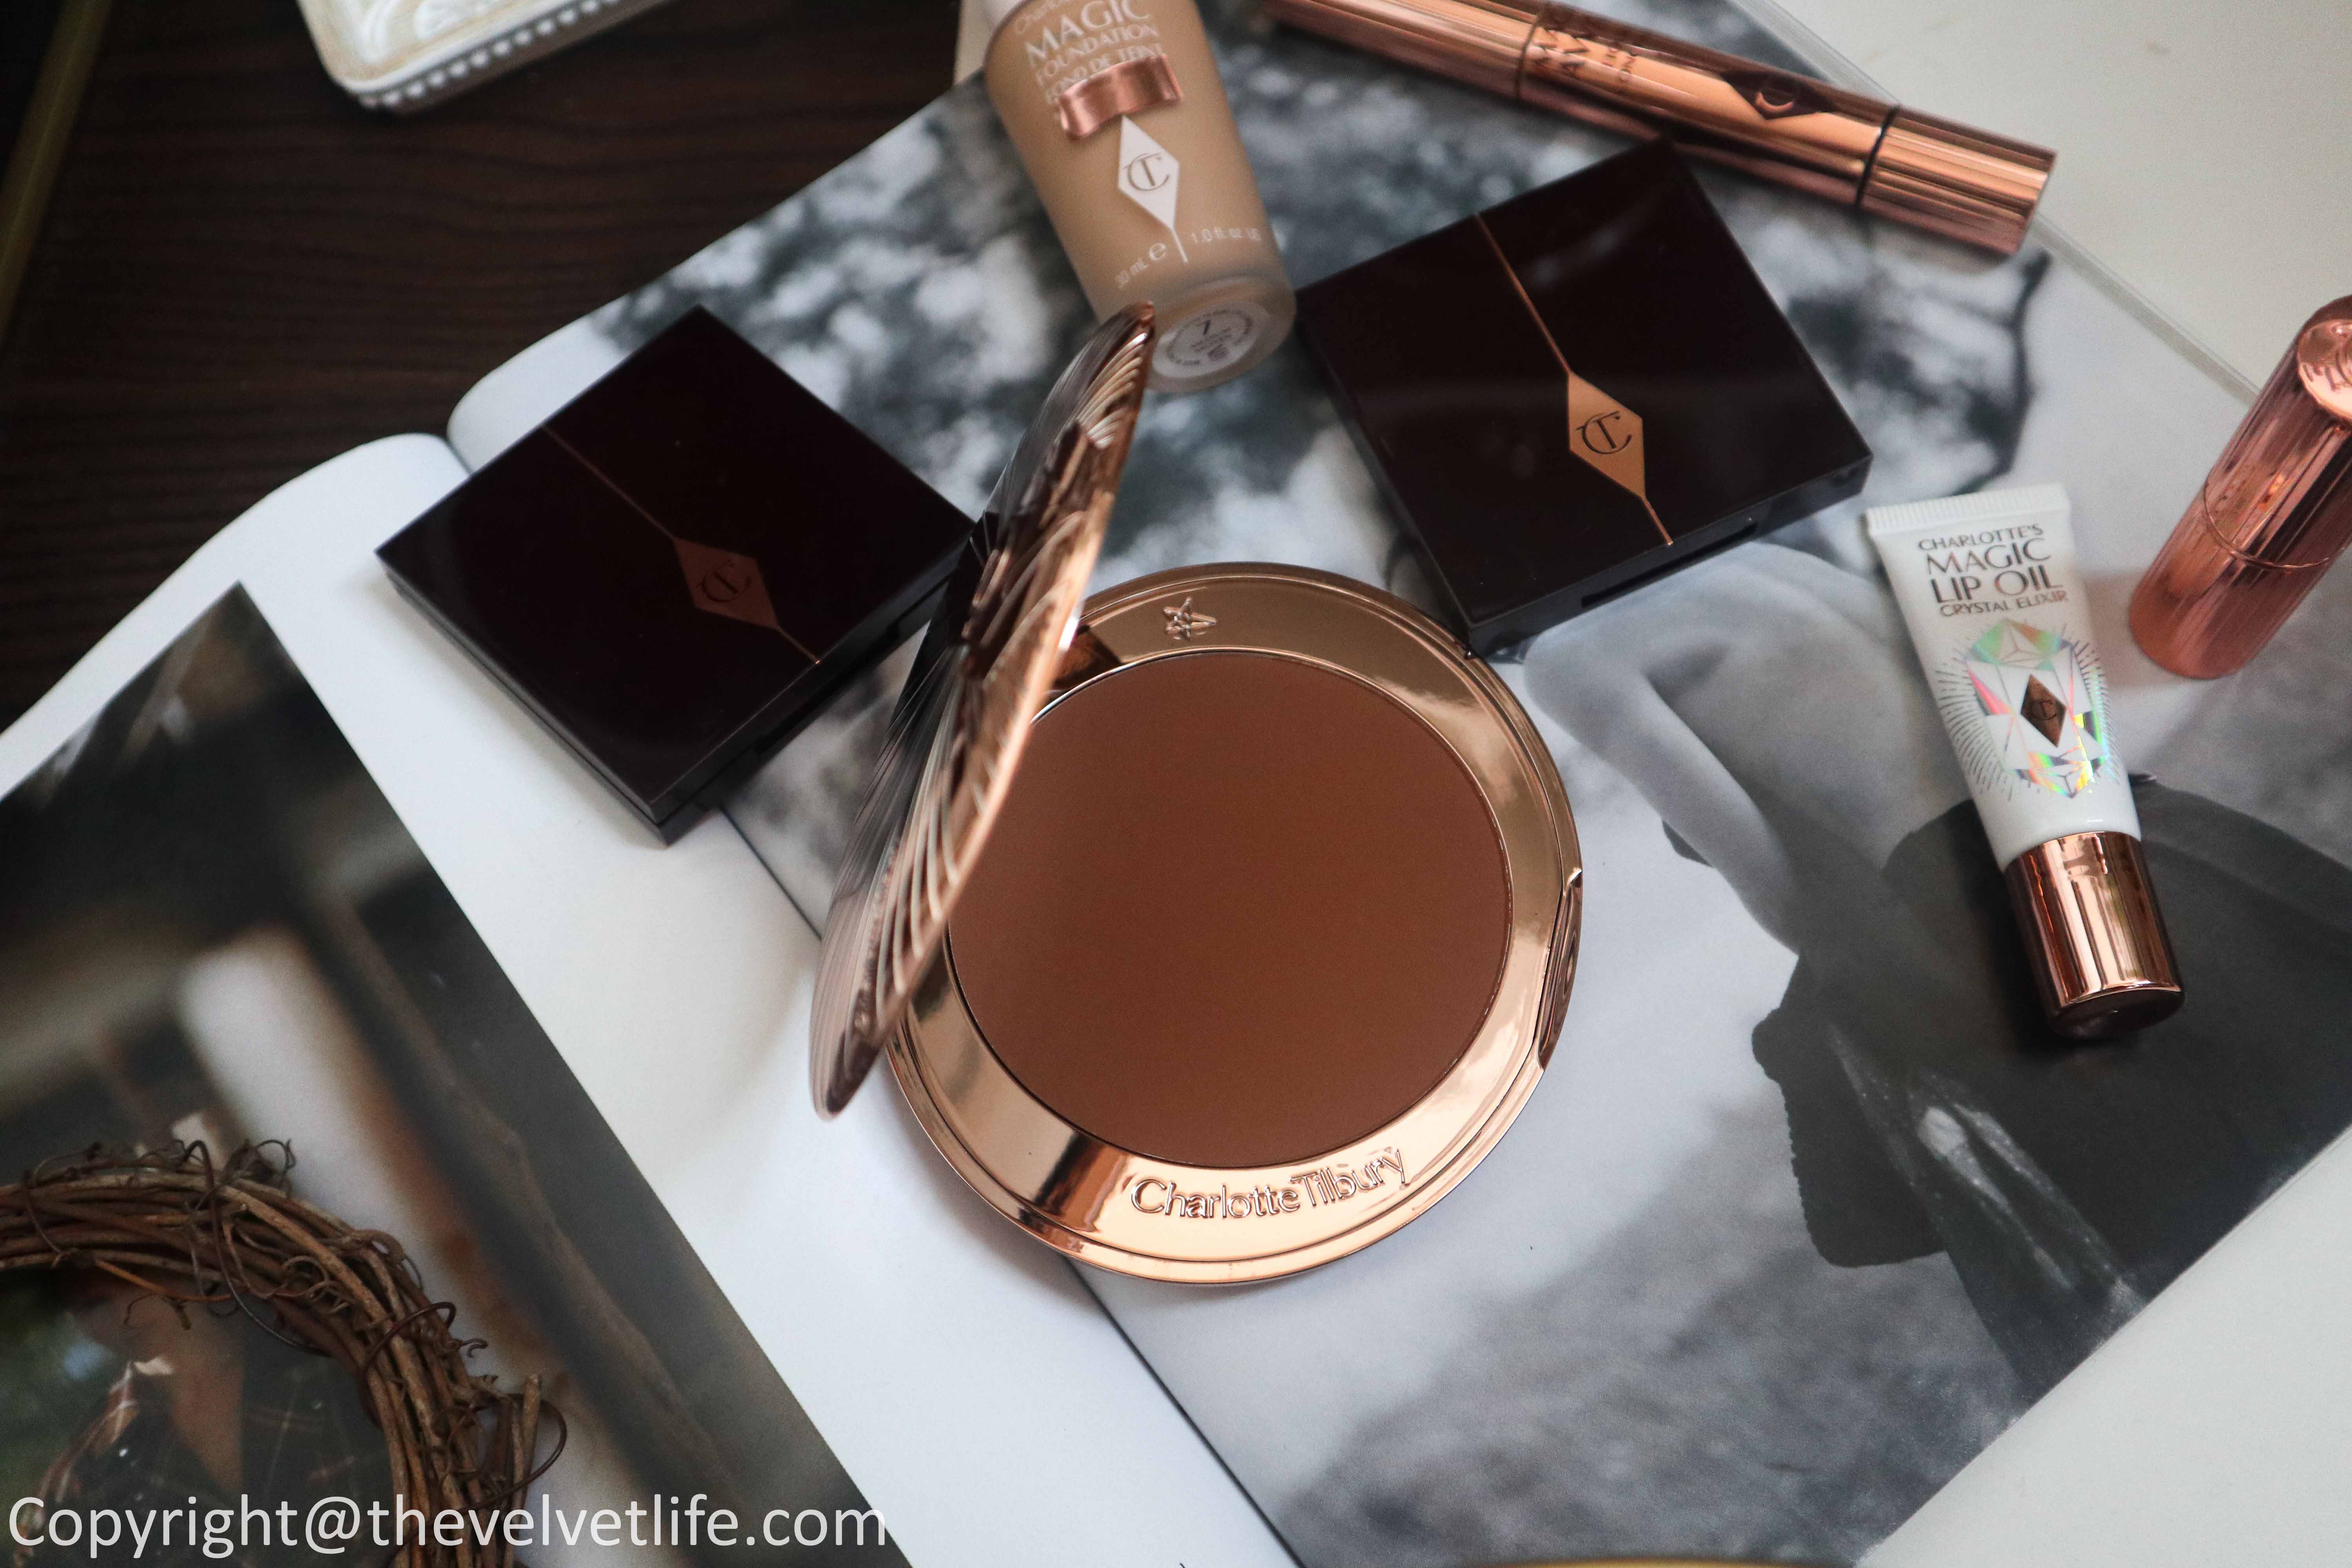 Review of new Charlotte Tilbury Airbrush Bronzer, Magic Lip Oil Crystal Elixir, Queen of Glow, Sexy Sienna, Magic foundation, Magic Away Concealer